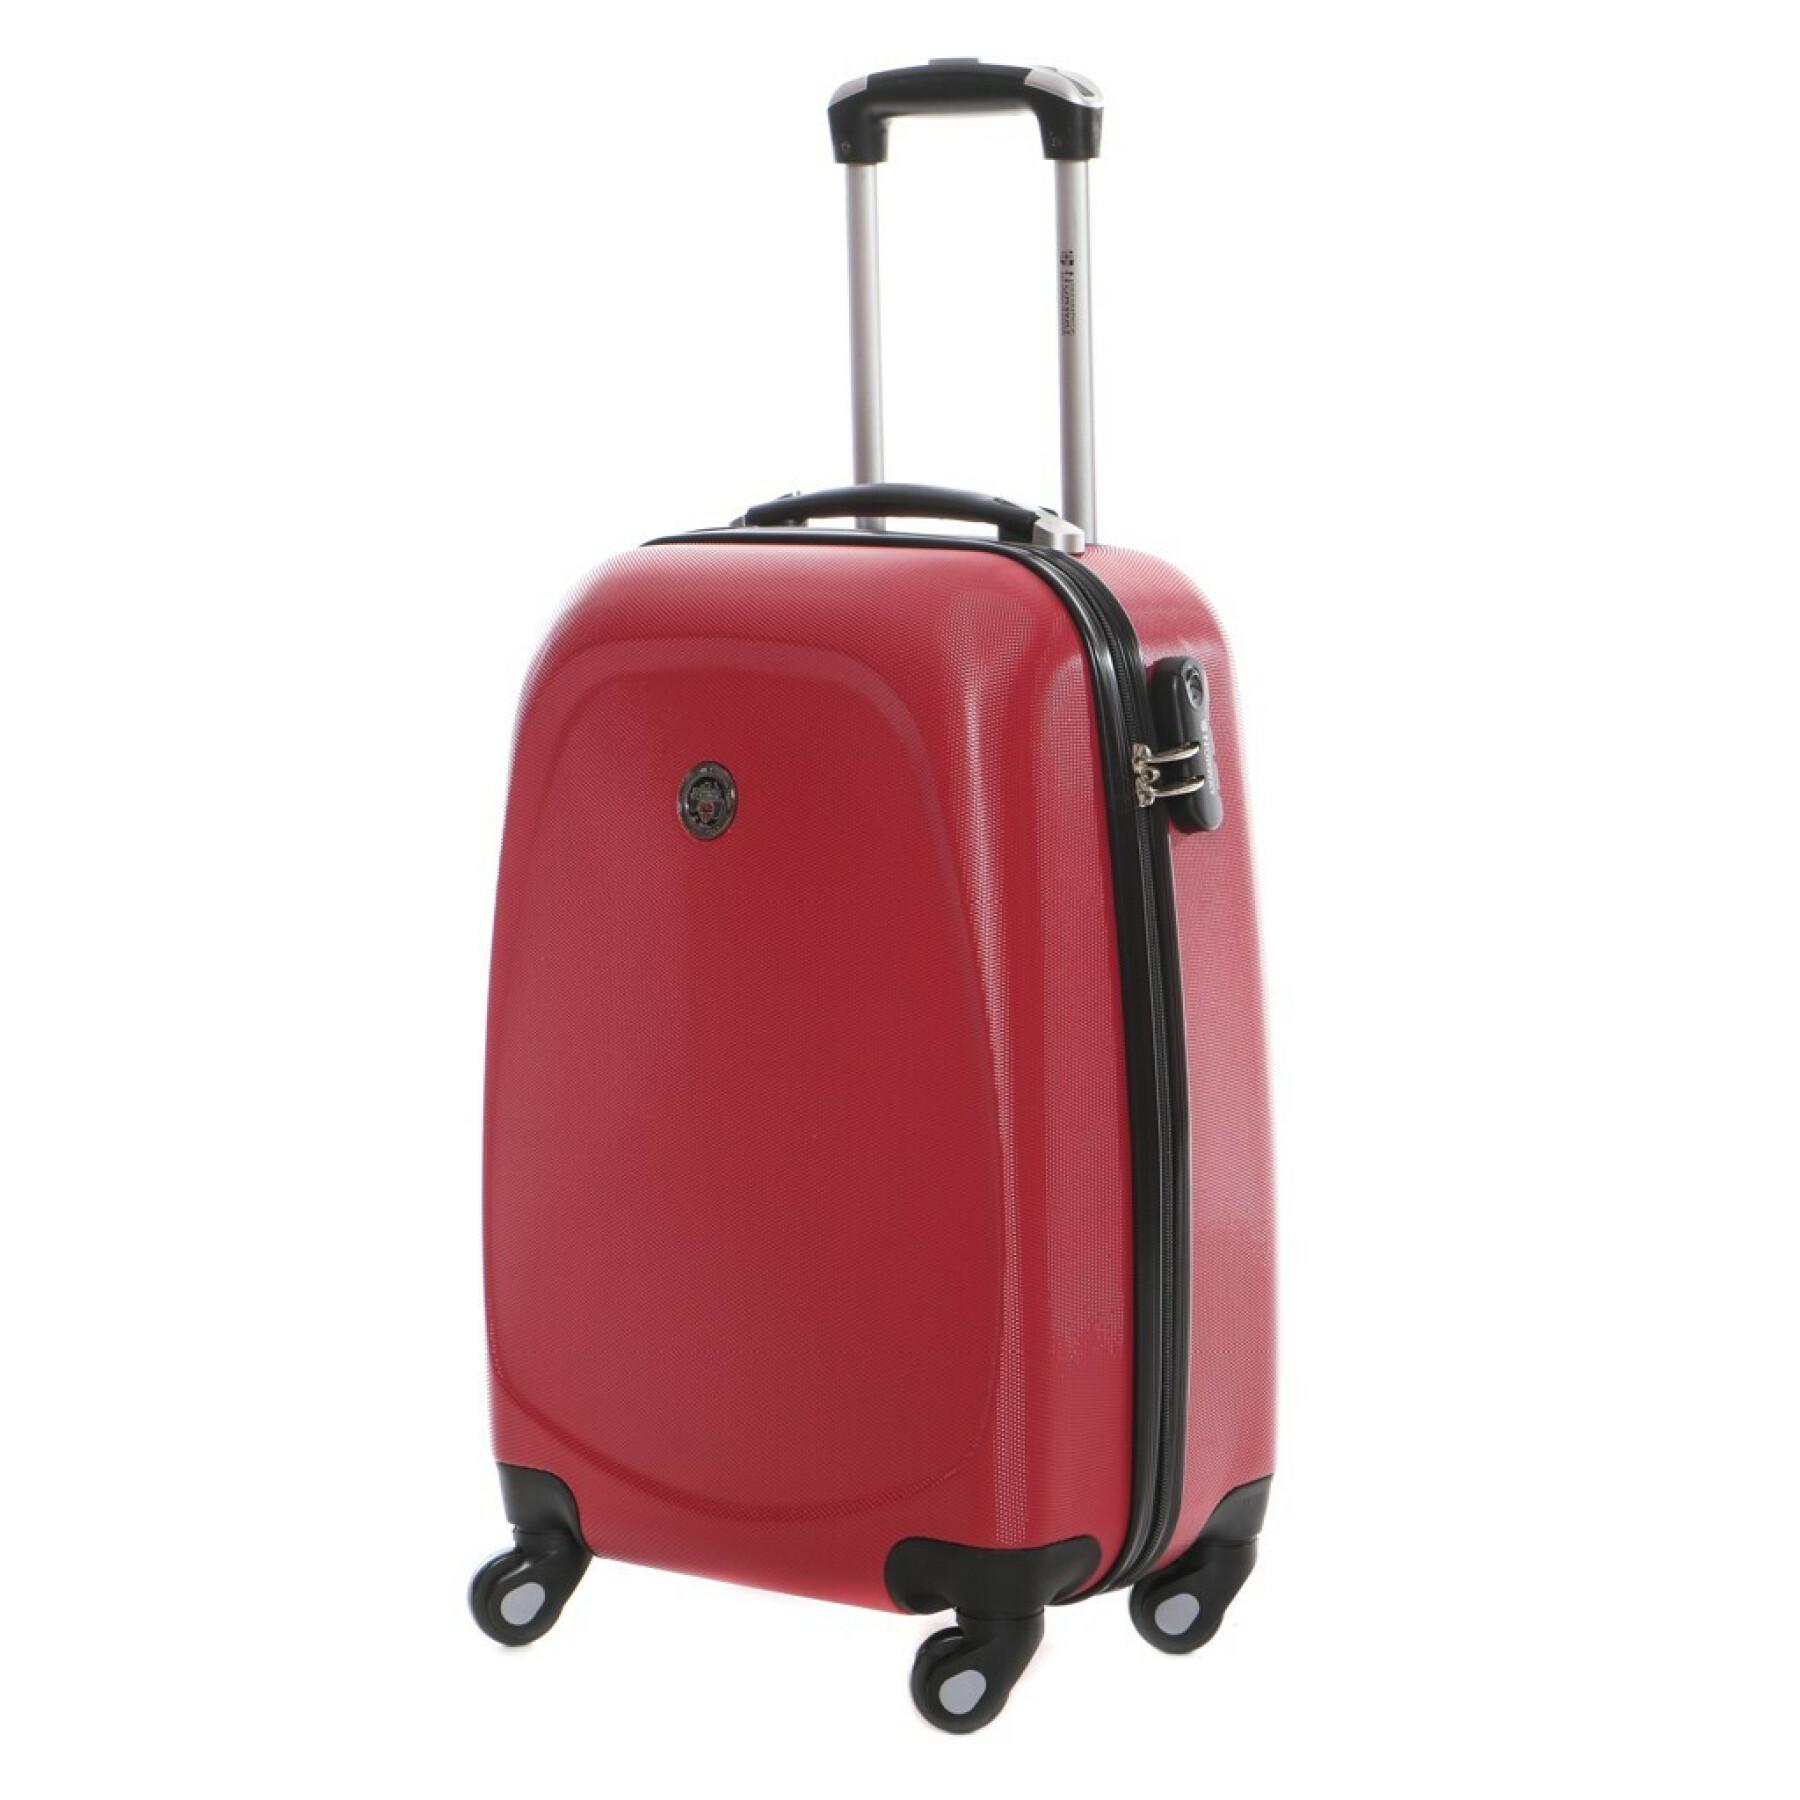 Suitcase Geographical Norway Seattles